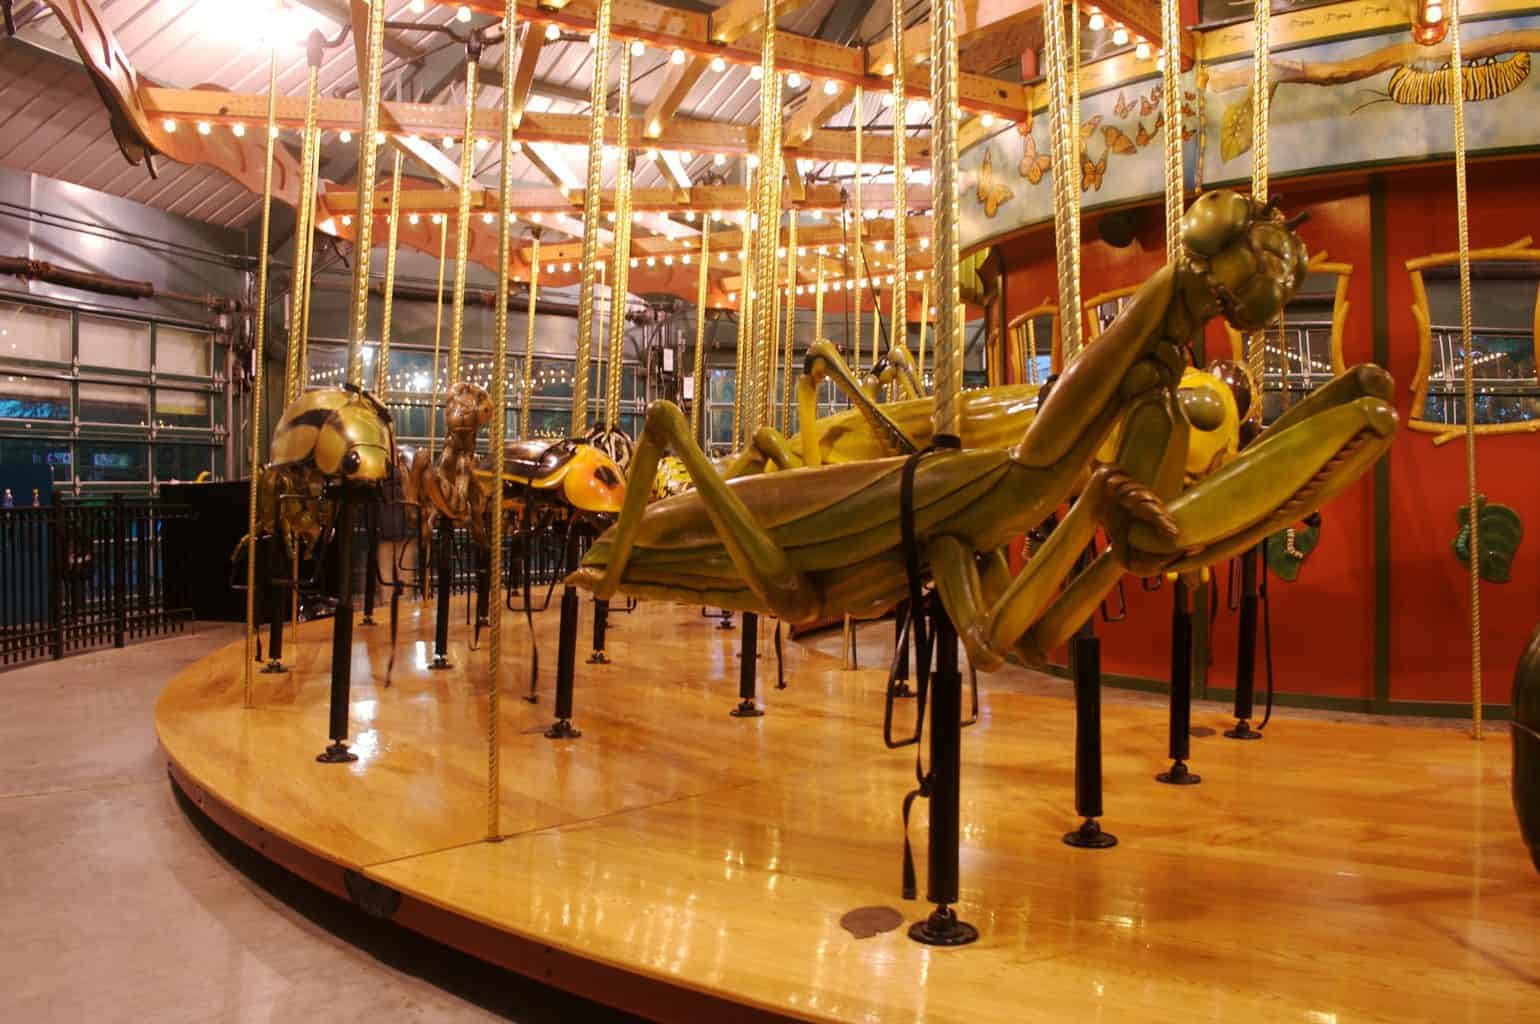 Take a ride aboard the Bronx Zoo's signature bug carousel and enjoy one of the most unusual things to do in NYC.